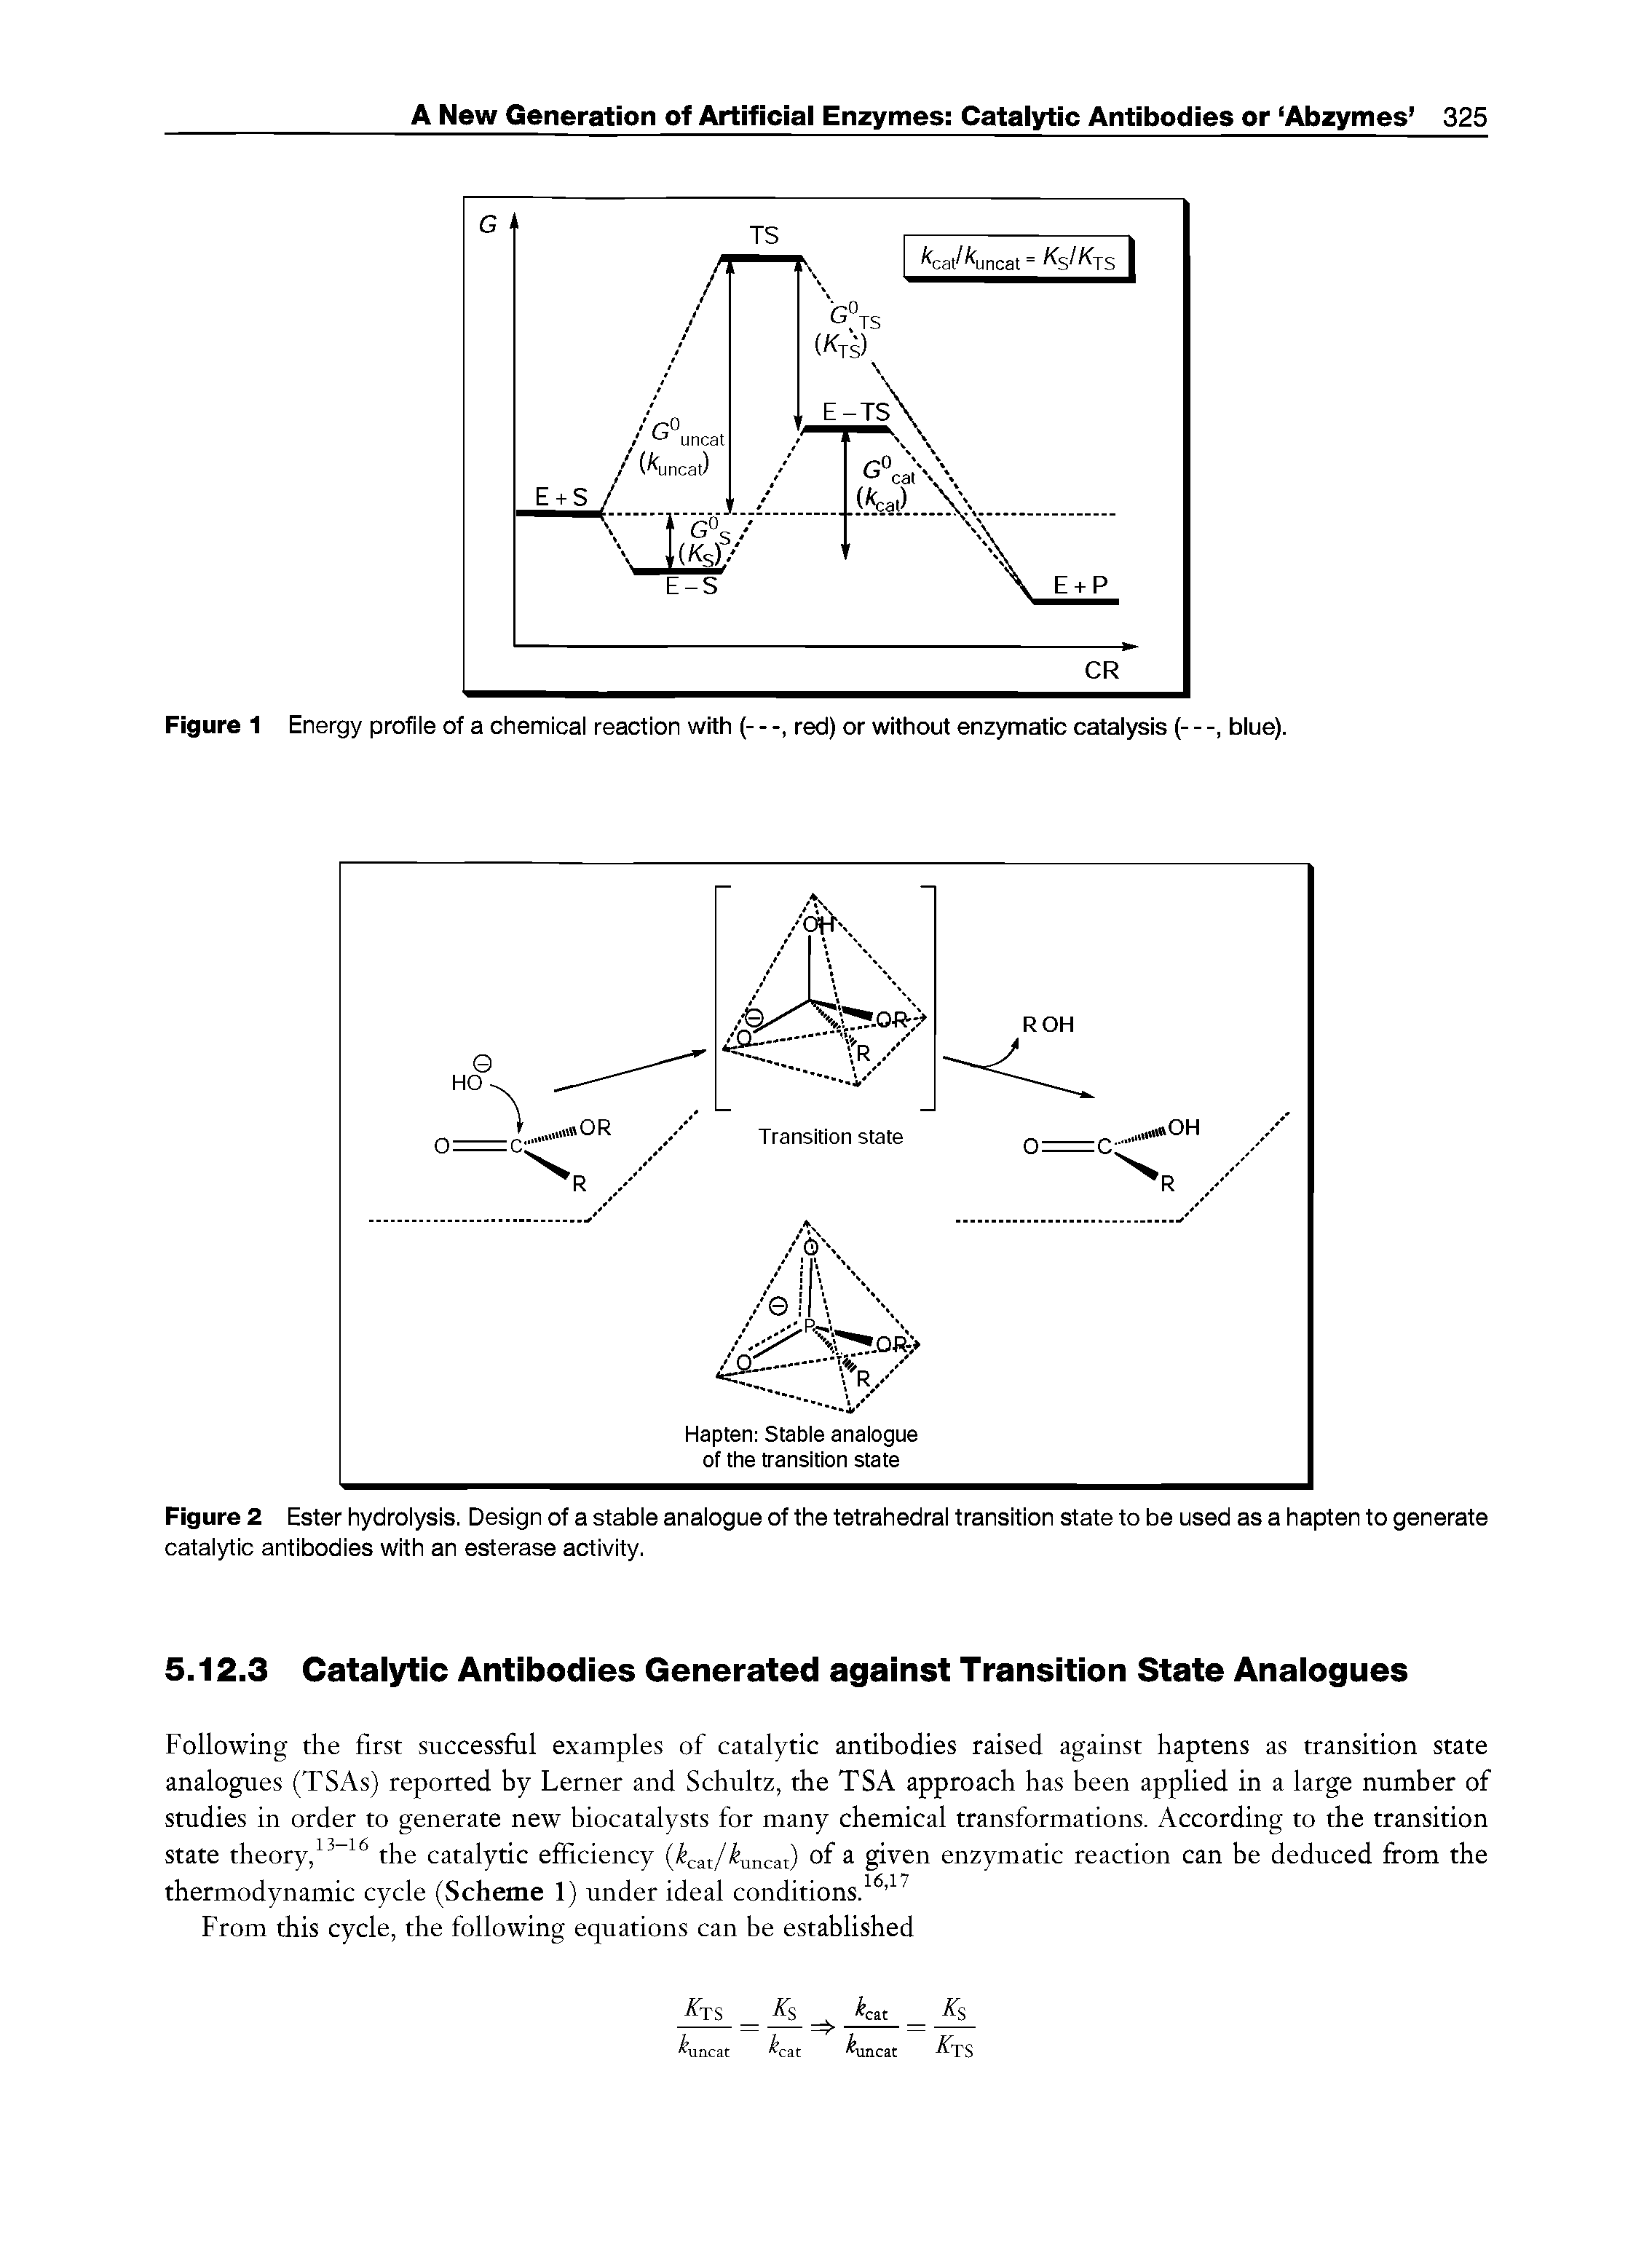 Figure 2 Ester hydrolysis. Design of a stable analogue of the tetrahedral transition state to be used as a hapten to generate catalytic antibodies with an esterase activity.